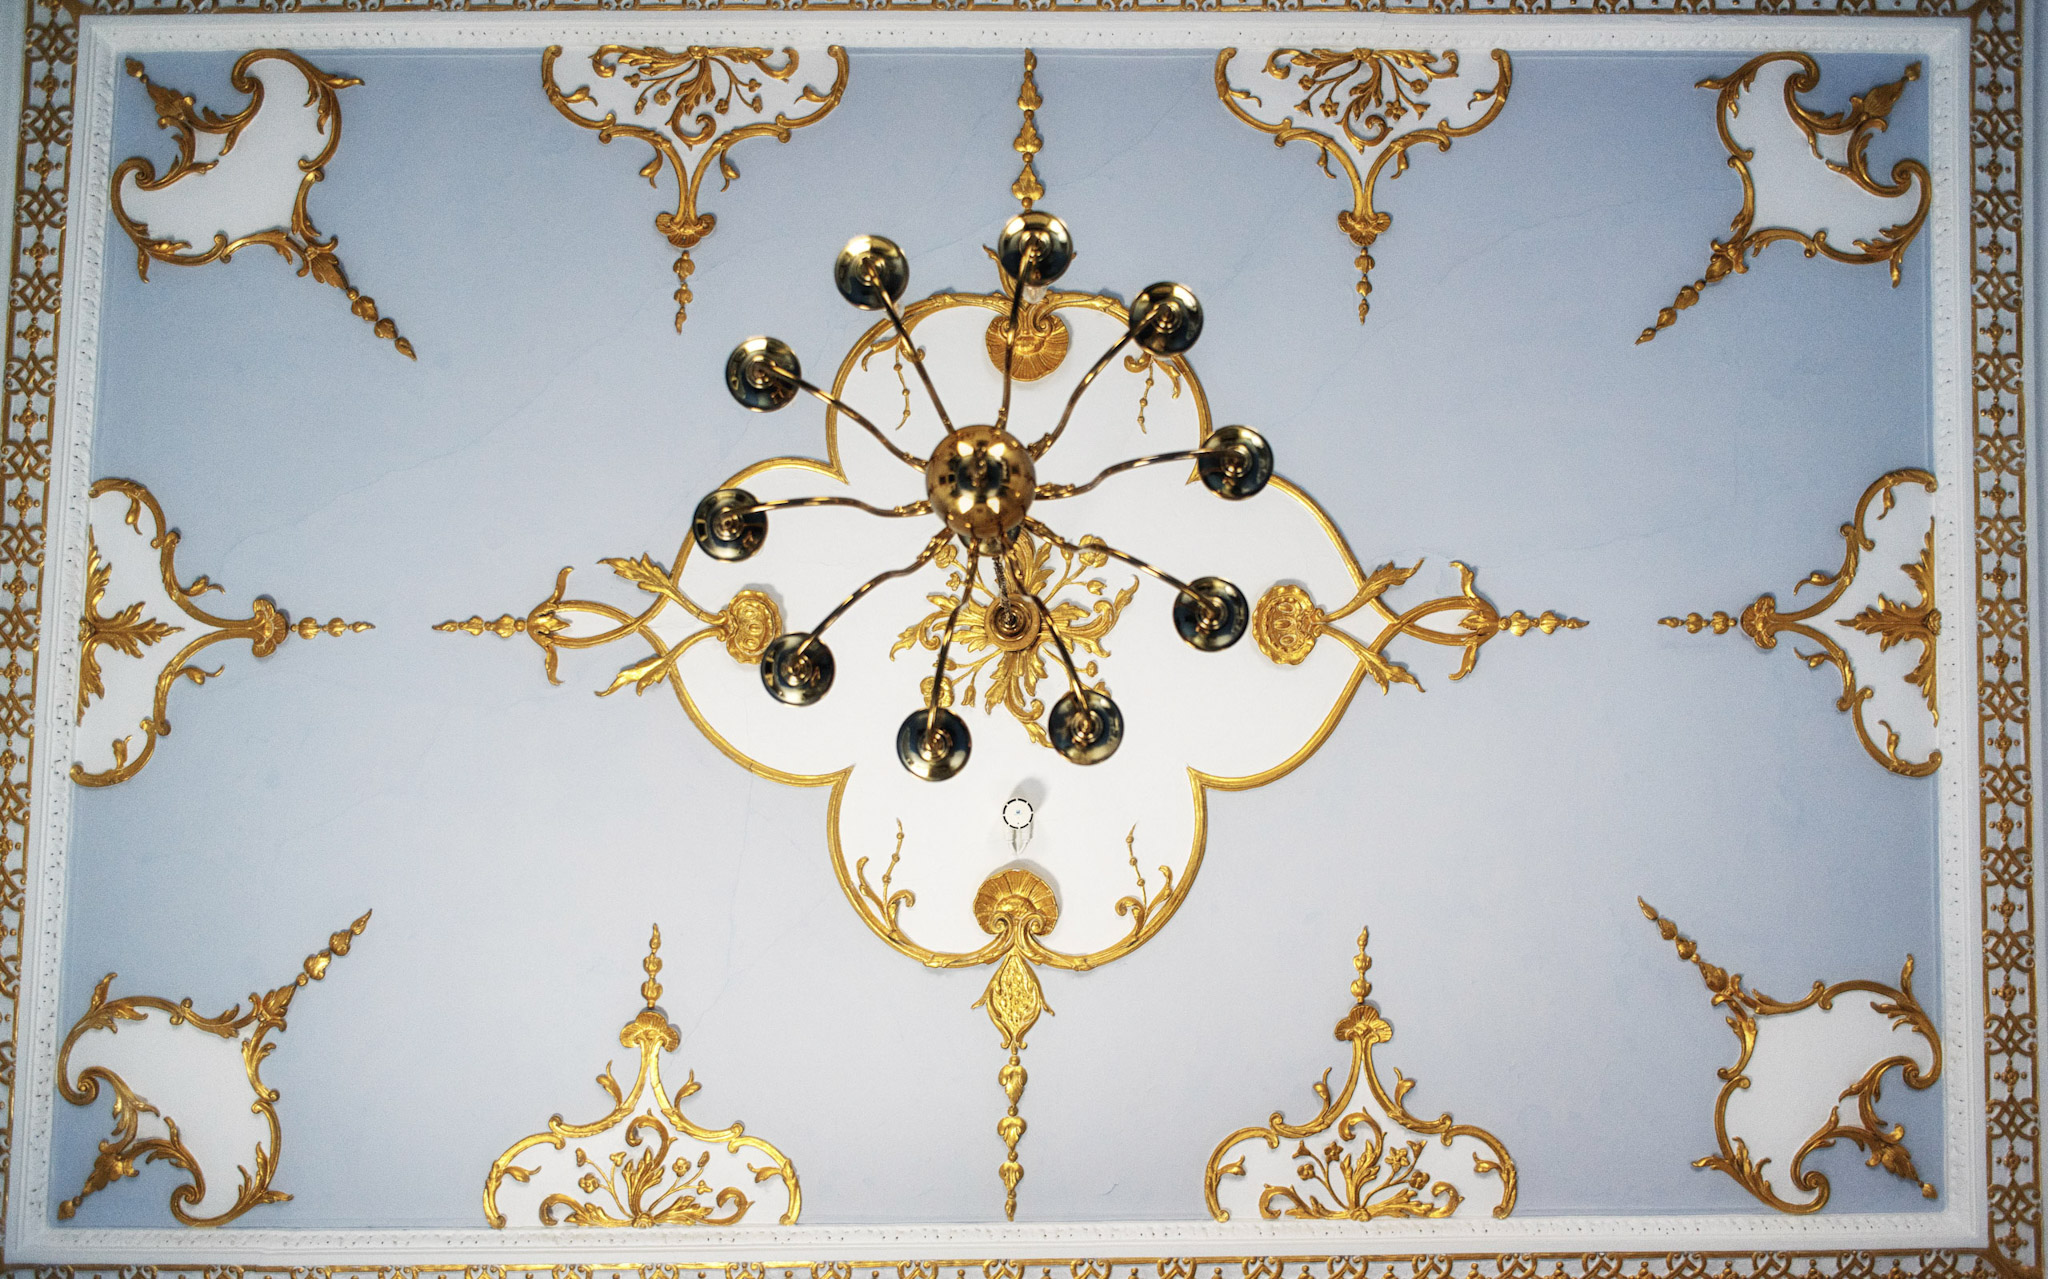 Golden decorative ceiling and chandelier in St Johns College